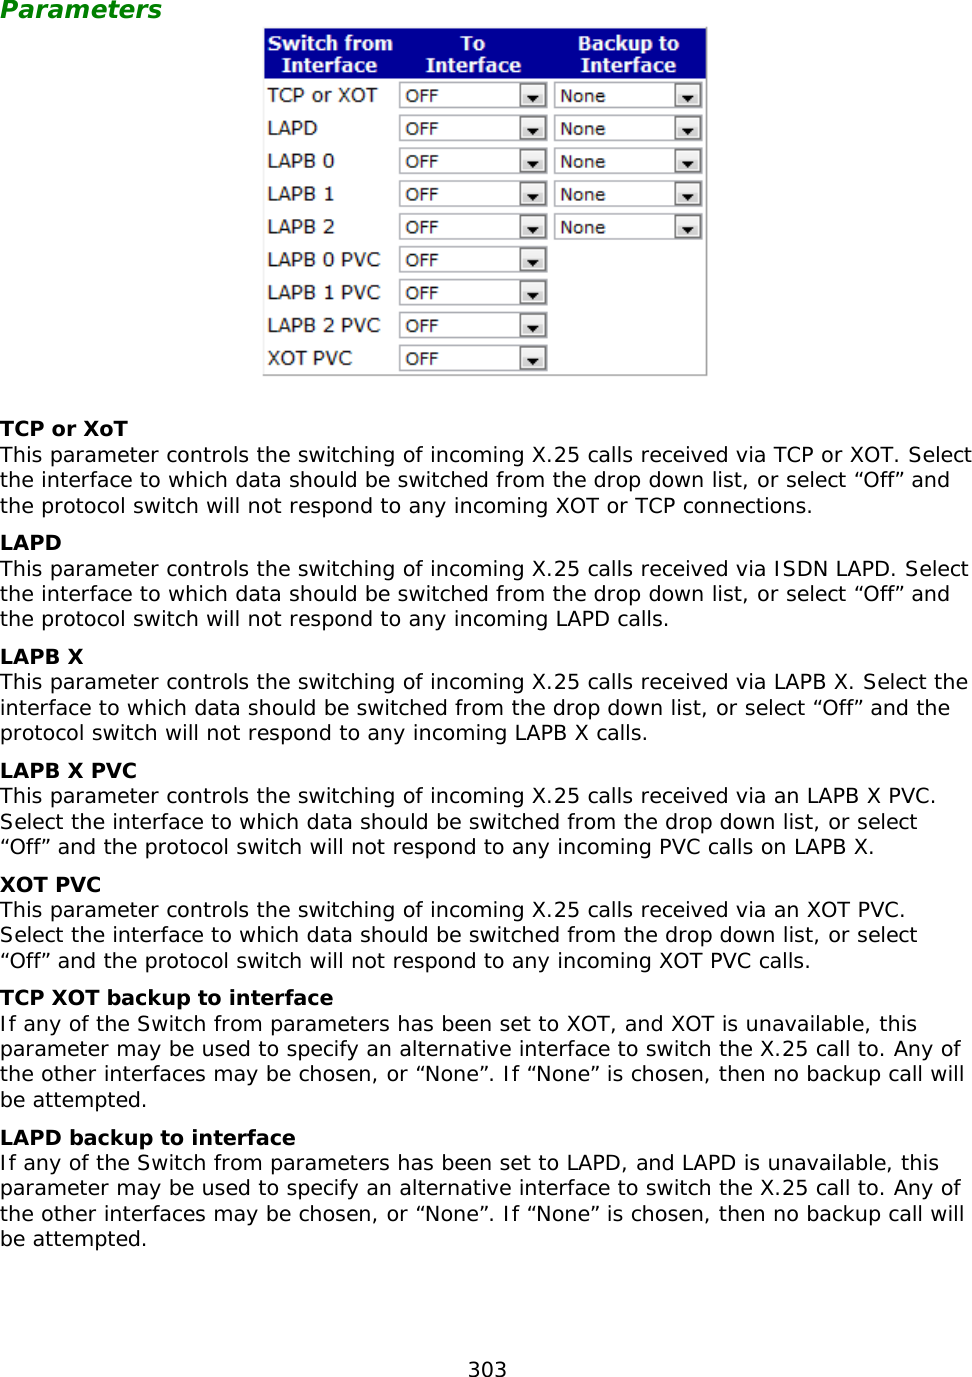 303  Parameters                TCP or XoT This parameter controls the switching of incoming X.25 calls received via TCP or XOT. Select the interface to which data should be switched from the drop down list, or select “Off” and the protocol switch will not respond to any incoming XOT or TCP connections. LAPD This parameter controls the switching of incoming X.25 calls received via ISDN LAPD. Select the interface to which data should be switched from the drop down list, or select “Off” and the protocol switch will not respond to any incoming LAPD calls. LAPB X This parameter controls the switching of incoming X.25 calls received via LAPB X. Select the interface to which data should be switched from the drop down list, or select “Off” and the protocol switch will not respond to any incoming LAPB X calls. LAPB X PVC This parameter controls the switching of incoming X.25 calls received via an LAPB X PVC. Select the interface to which data should be switched from the drop down list, or select “Off” and the protocol switch will not respond to any incoming PVC calls on LAPB X. XOT PVC This parameter controls the switching of incoming X.25 calls received via an XOT PVC. Select the interface to which data should be switched from the drop down list, or select “Off” and the protocol switch will not respond to any incoming XOT PVC calls. TCP XOT backup to interface If any of the Switch from parameters has been set to XOT, and XOT is unavailable, this parameter may be used to specify an alternative interface to switch the X.25 call to. Any of the other interfaces may be chosen, or “None”. If “None” is chosen, then no backup call will be attempted. LAPD backup to interface If any of the Switch from parameters has been set to LAPD, and LAPD is unavailable, this parameter may be used to specify an alternative interface to switch the X.25 call to. Any of the other interfaces may be chosen, or “None”. If “None” is chosen, then no backup call will be attempted.    